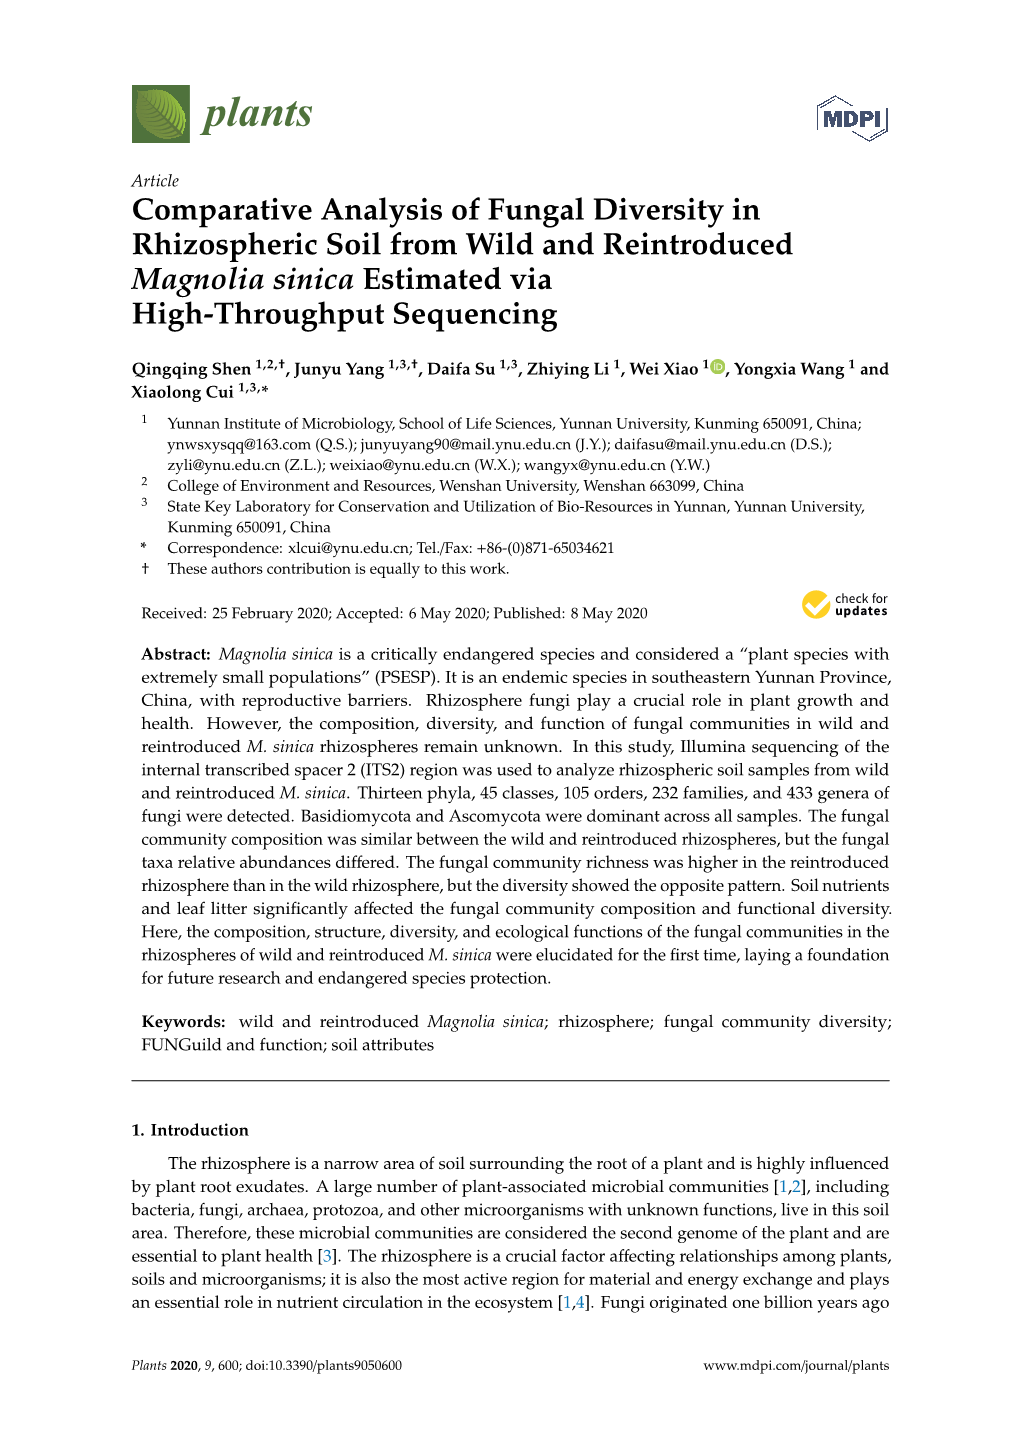 Comparative Analysis of Fungal Diversity in Rhizospheric Soil from Wild and Reintroduced Magnolia Sinica Estimated Via High-Throughput Sequencing